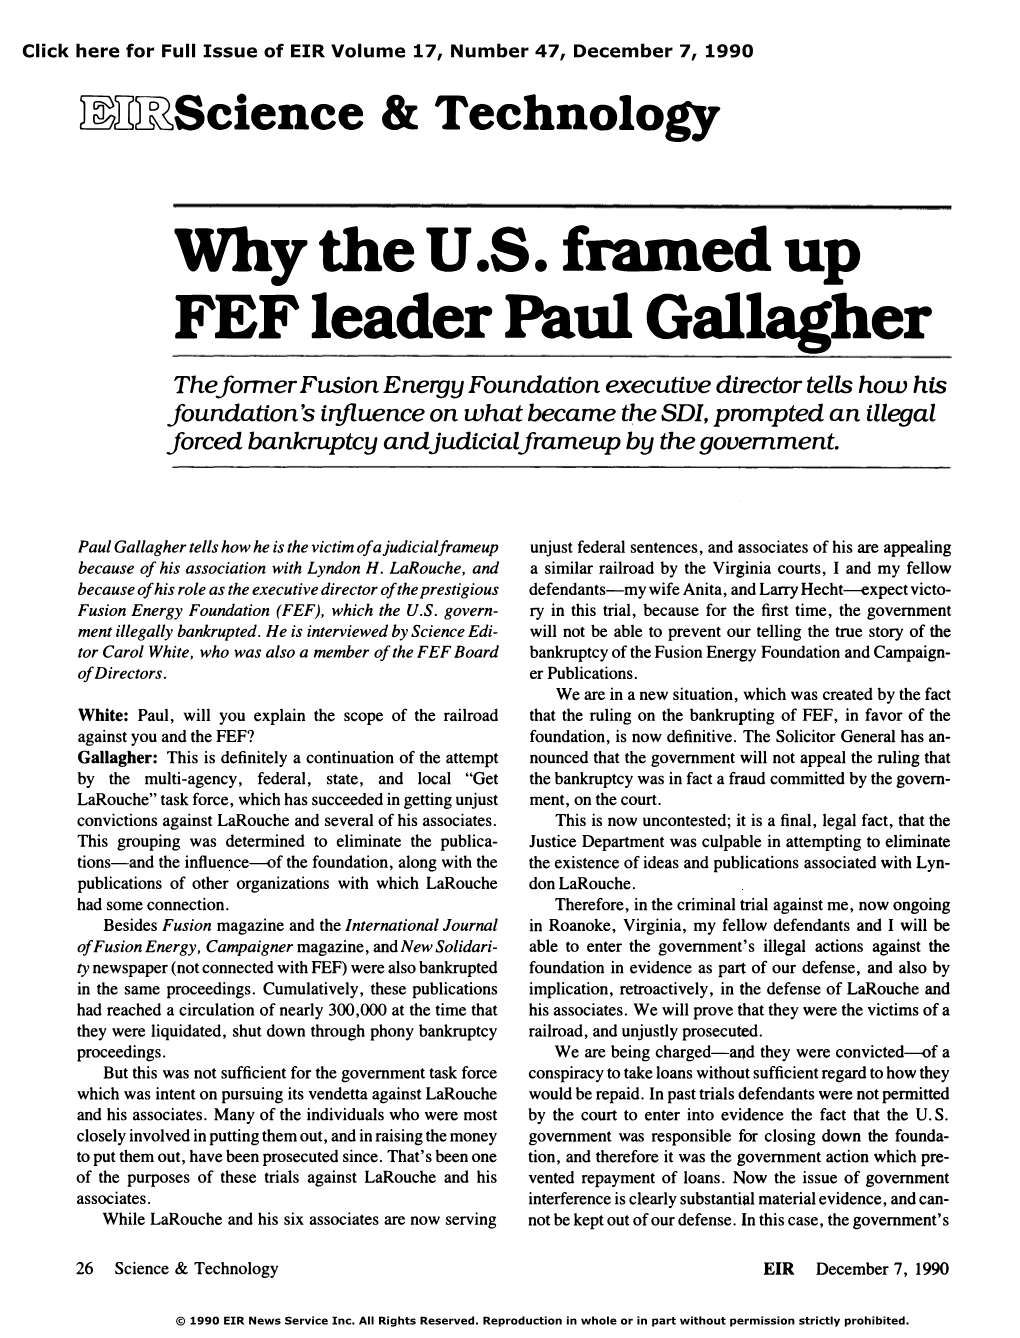 Why the U.S. Framed up FEF Leader Paul Gallagher